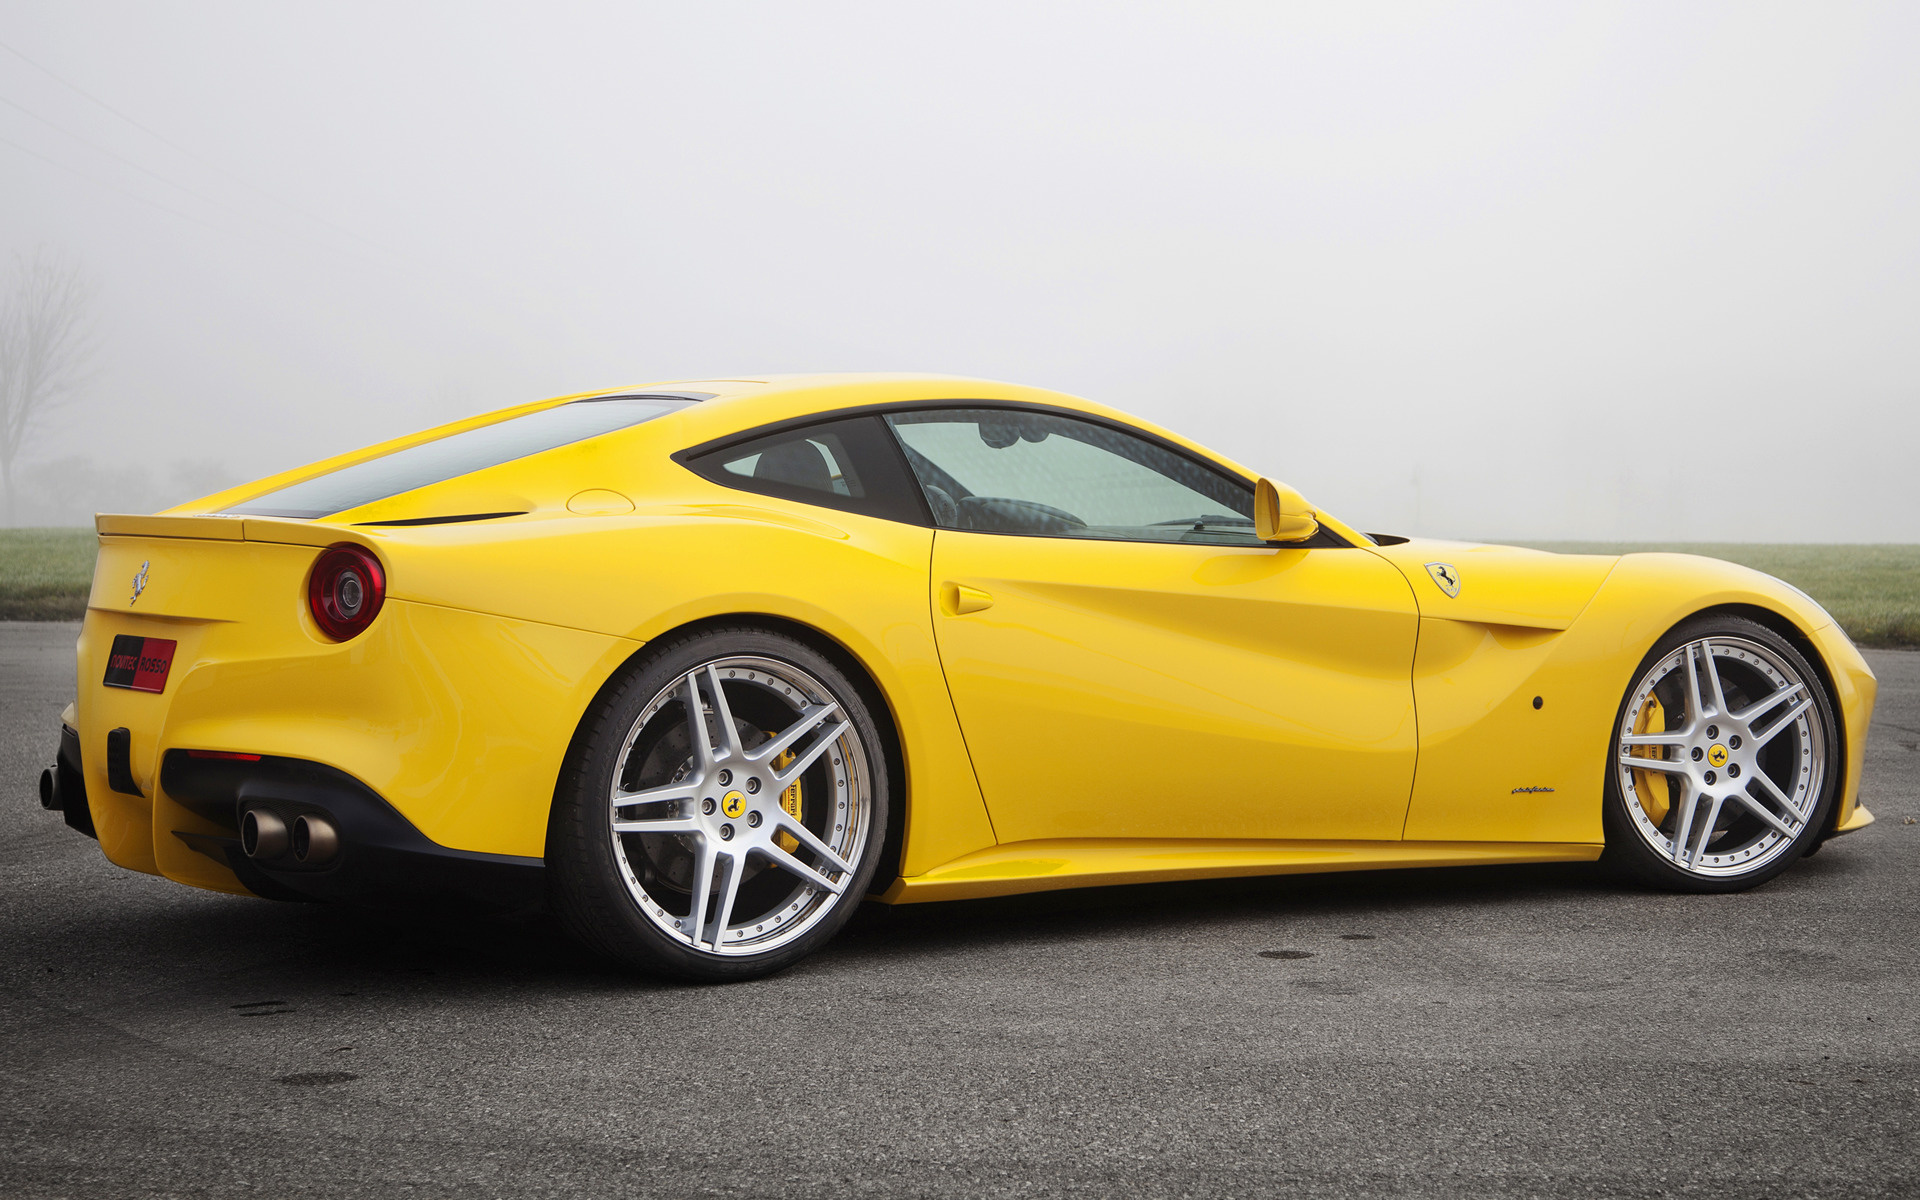 2012 Ferrari F12berlinetta by Novitec Rosso - Wallpapers and HD Images ...